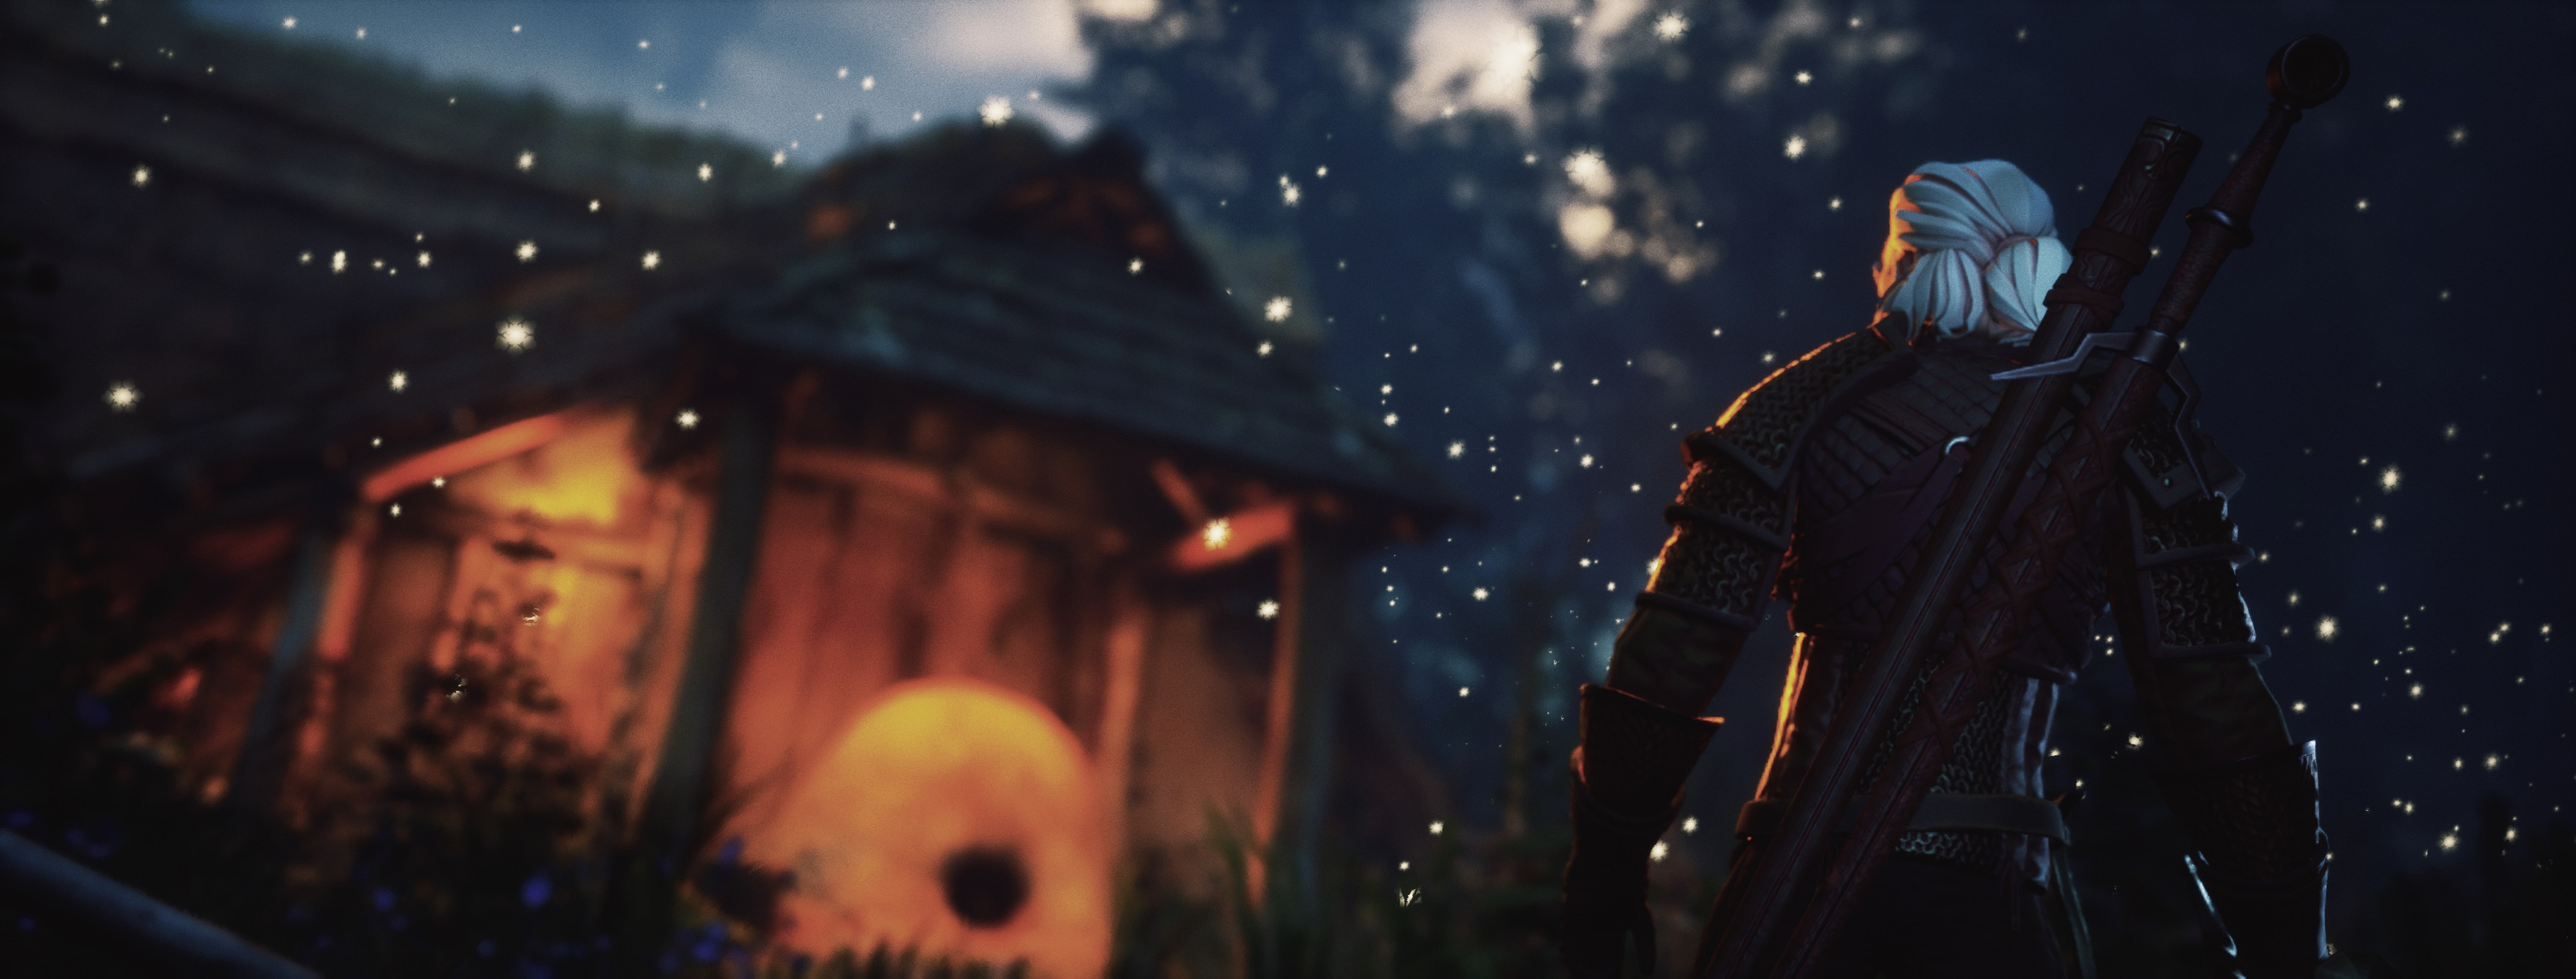 Michele Marchionni Snow Ultrawide Snowflakes The Witcher 3 Digital Art The Witcher 3 Wild Hunt The W 3840x1460